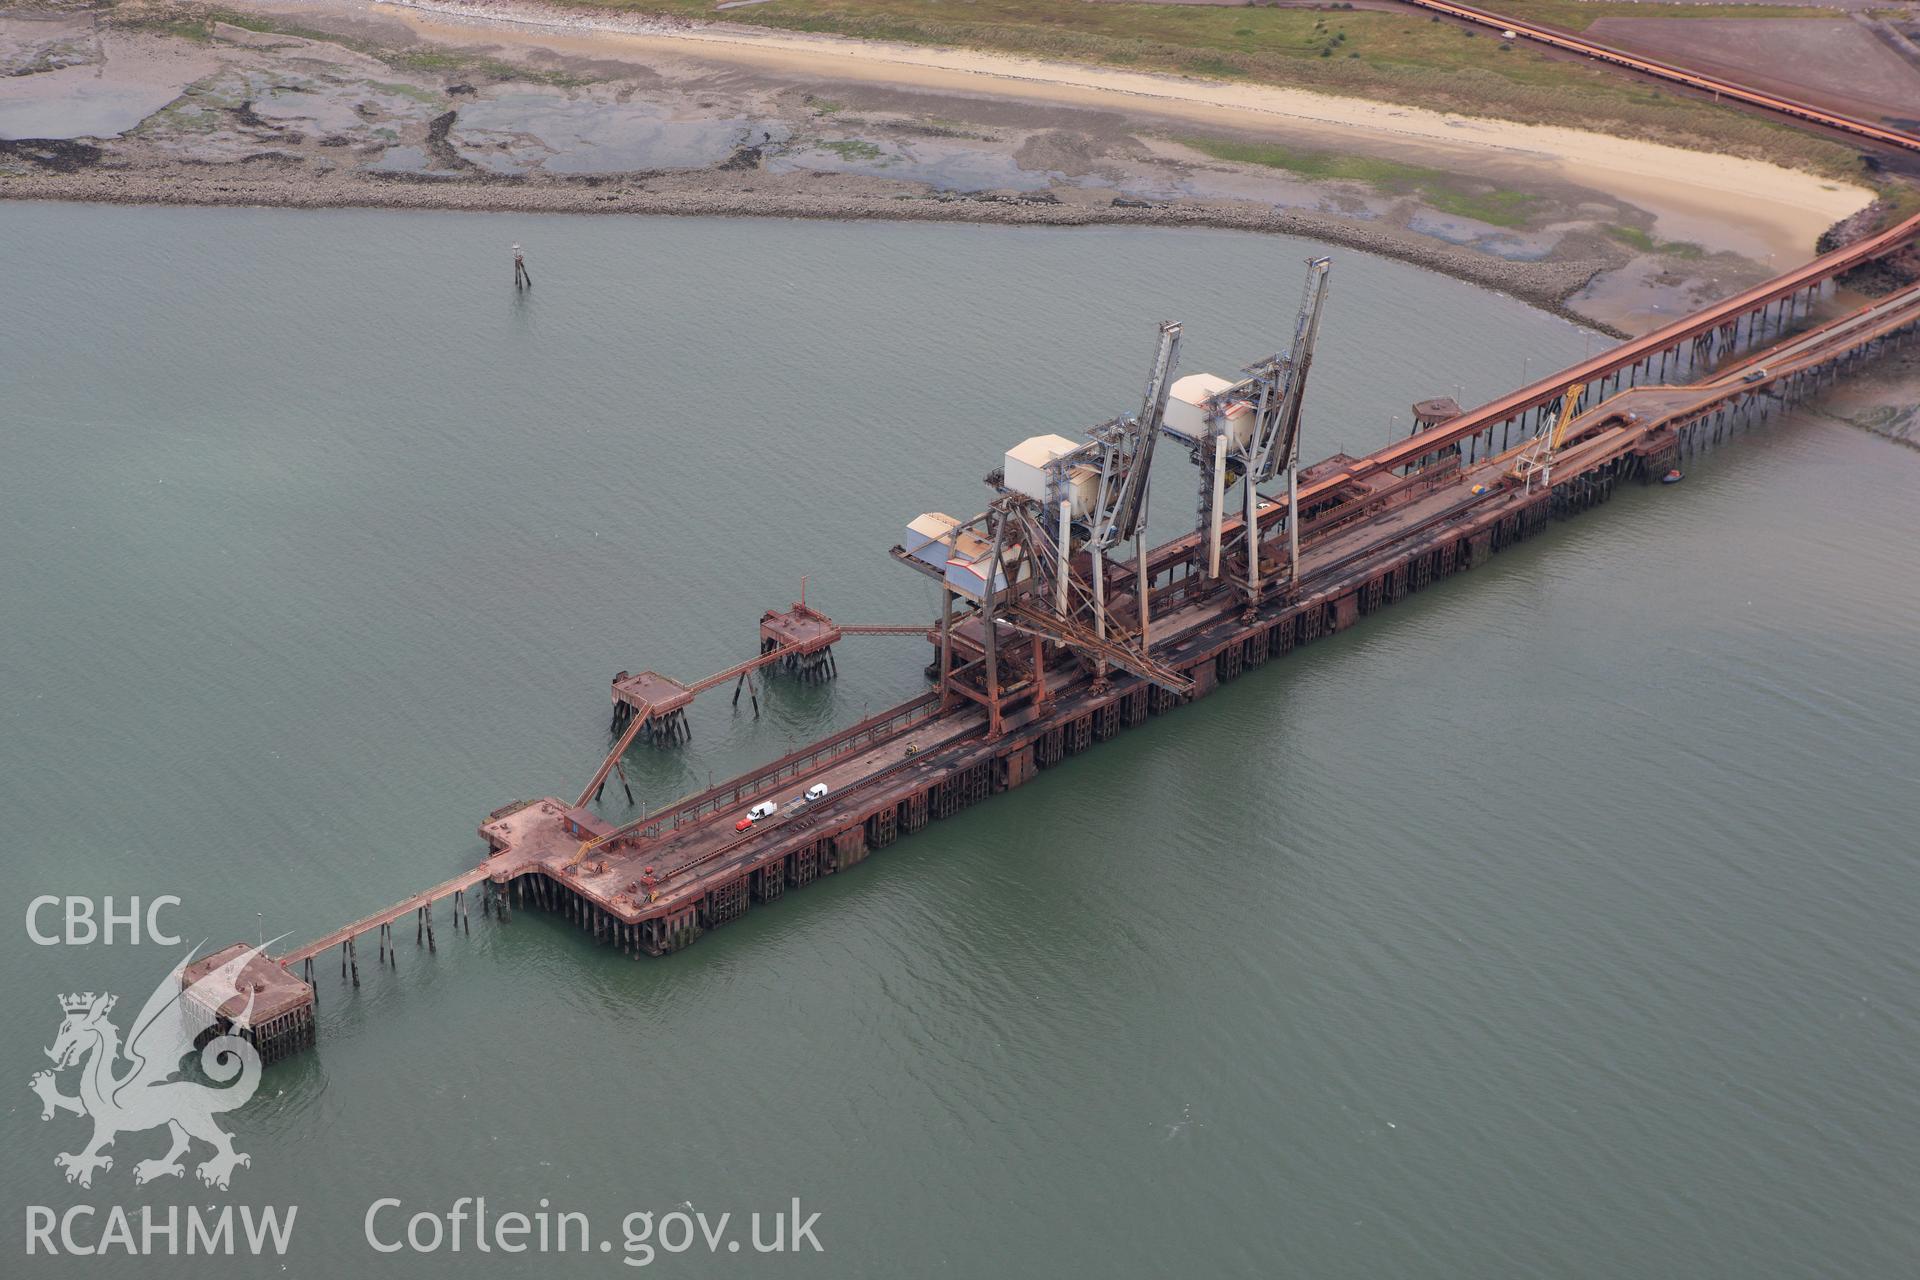 RCAHMW colour oblique aerial photograph of Port Talbot Docks showing cranes. Taken on 09 July 2009 by Toby Driver